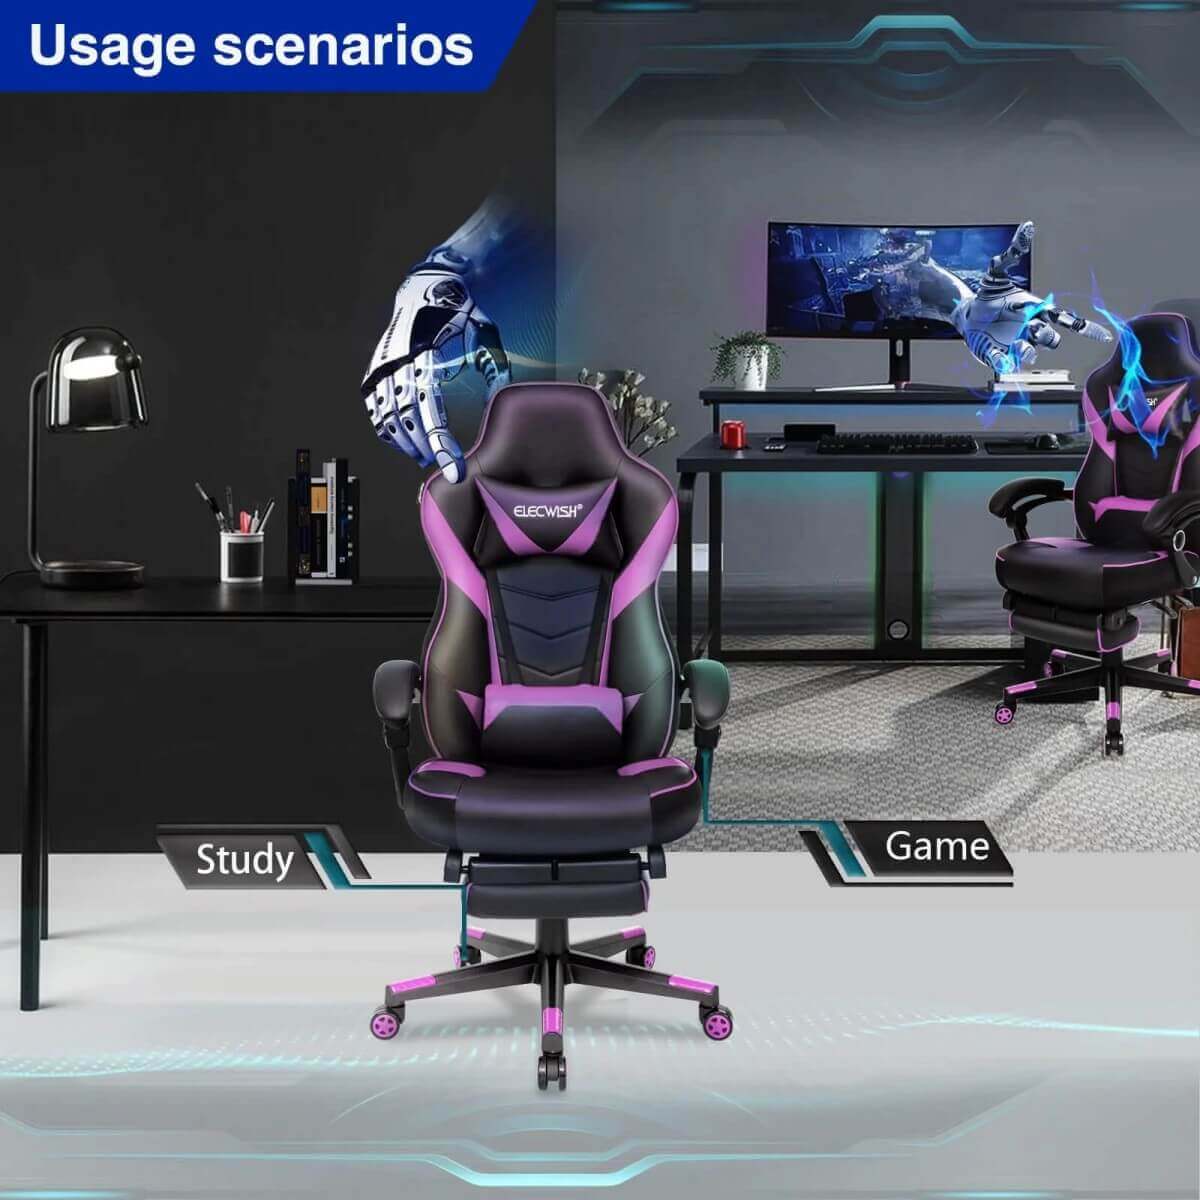 Usage scenarios Elecwish Video Game Chairs Purple Gaming Chair With Footrest OC087